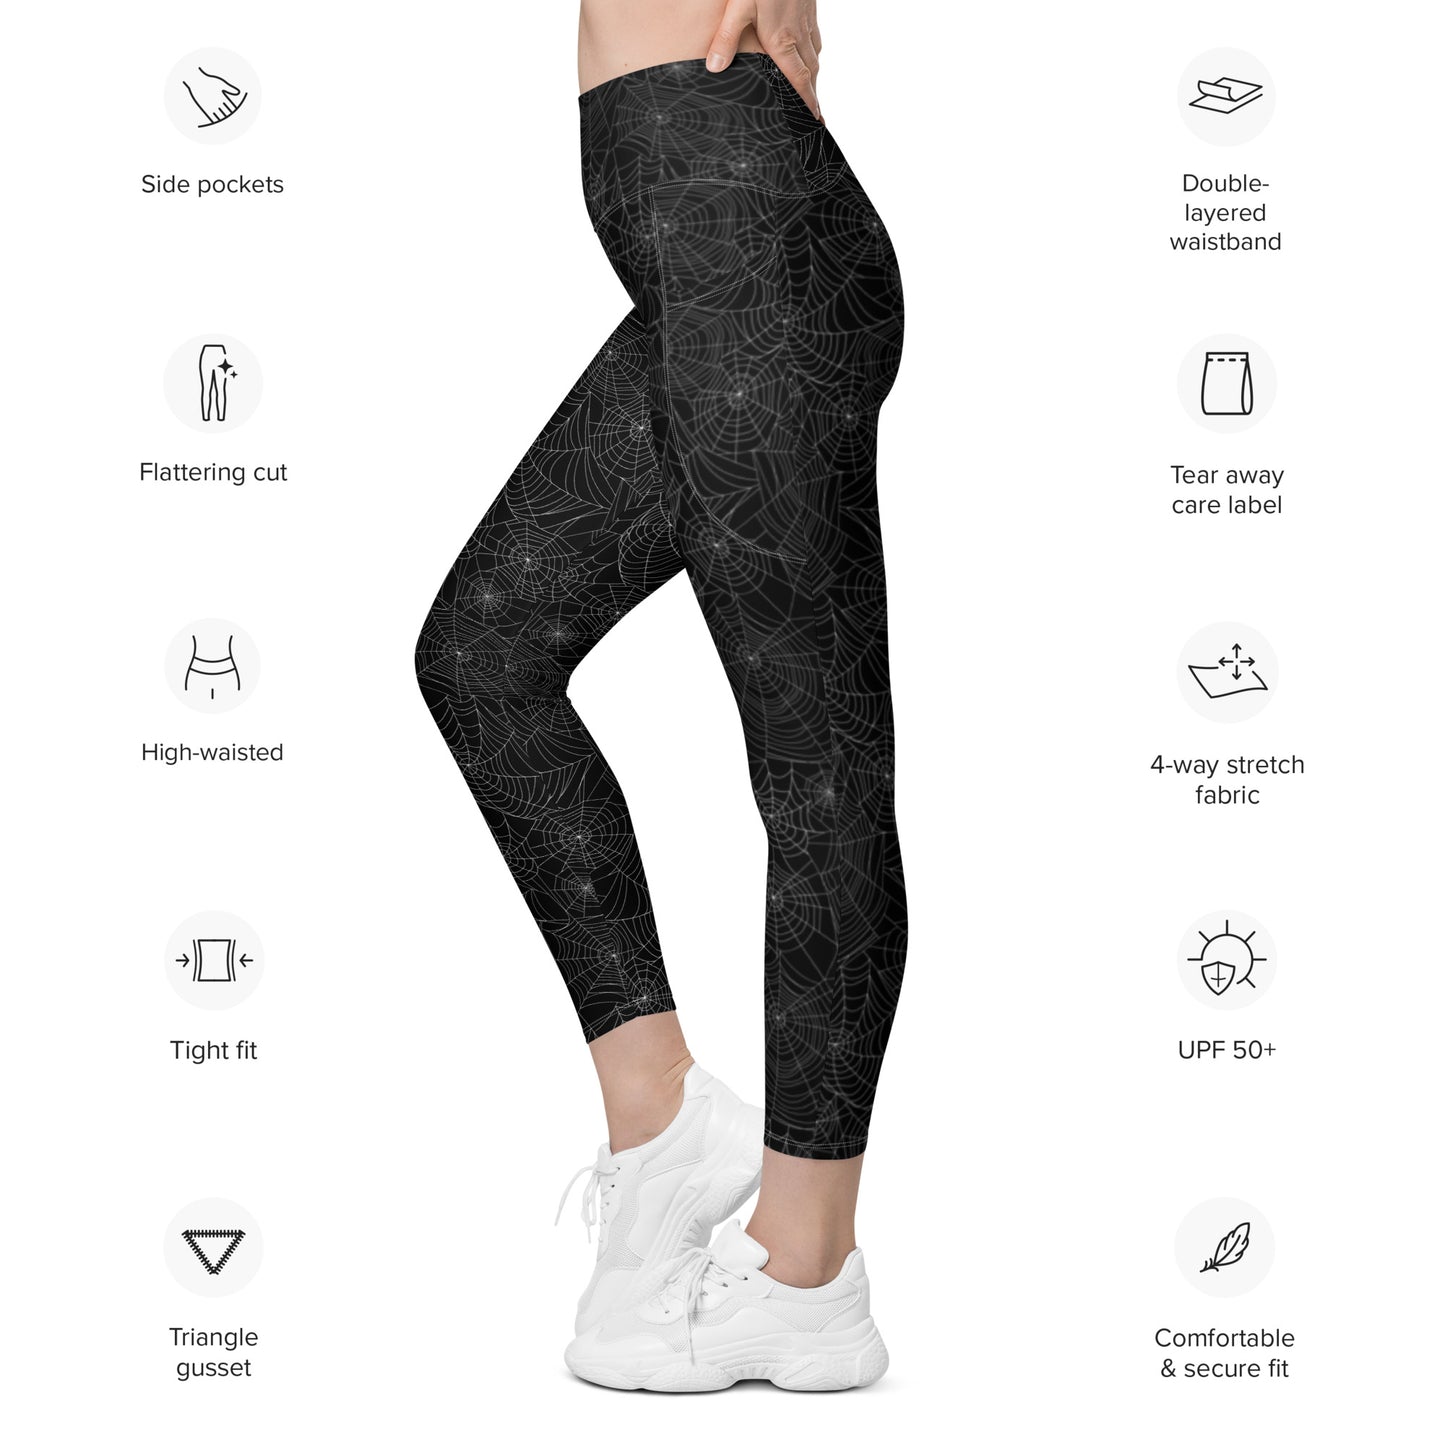 Spiderweb Leggings with pockets, high waisted, Halloween yoga pants, holiday exercise pants with pockets, pocket leggings, sizes 2xs - 6xl